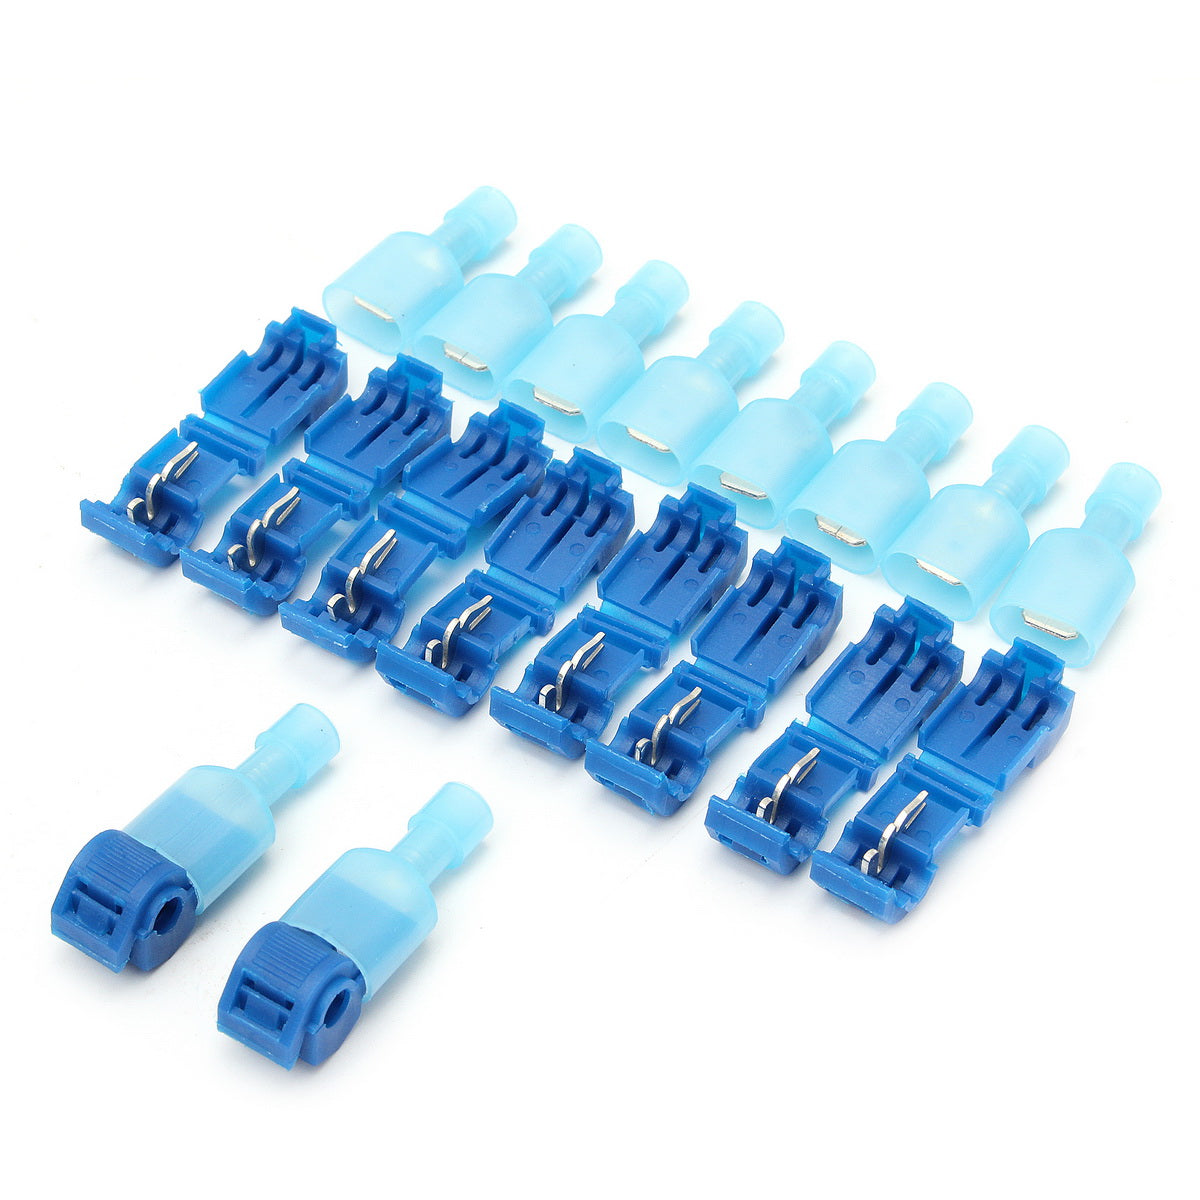 Excellway® TC01 60pcs T-Tap Male Female Insulated Wire Quick Splice Terminal Connectors Set